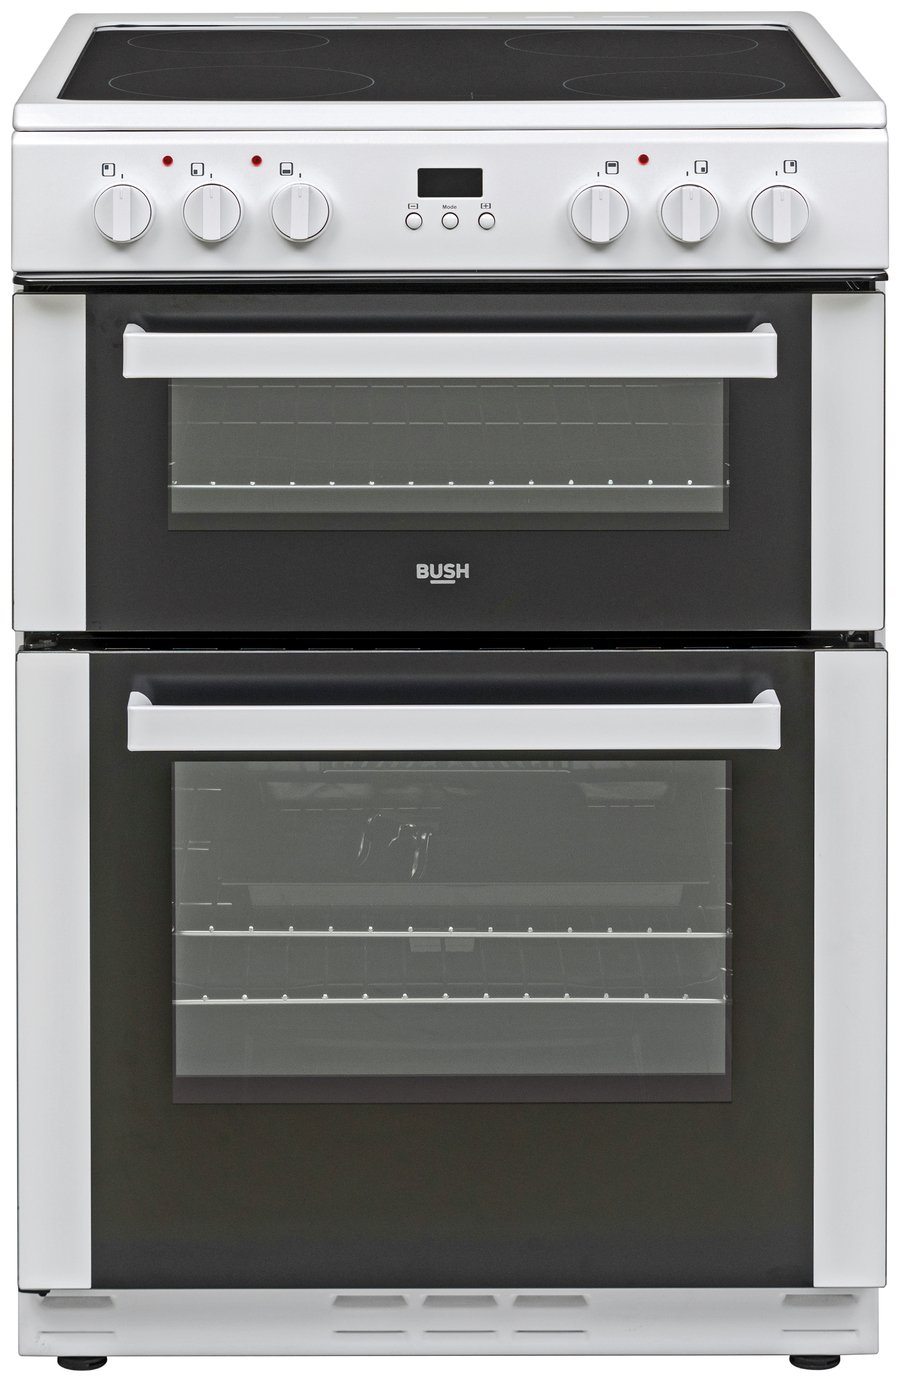 white double oven electric cooker